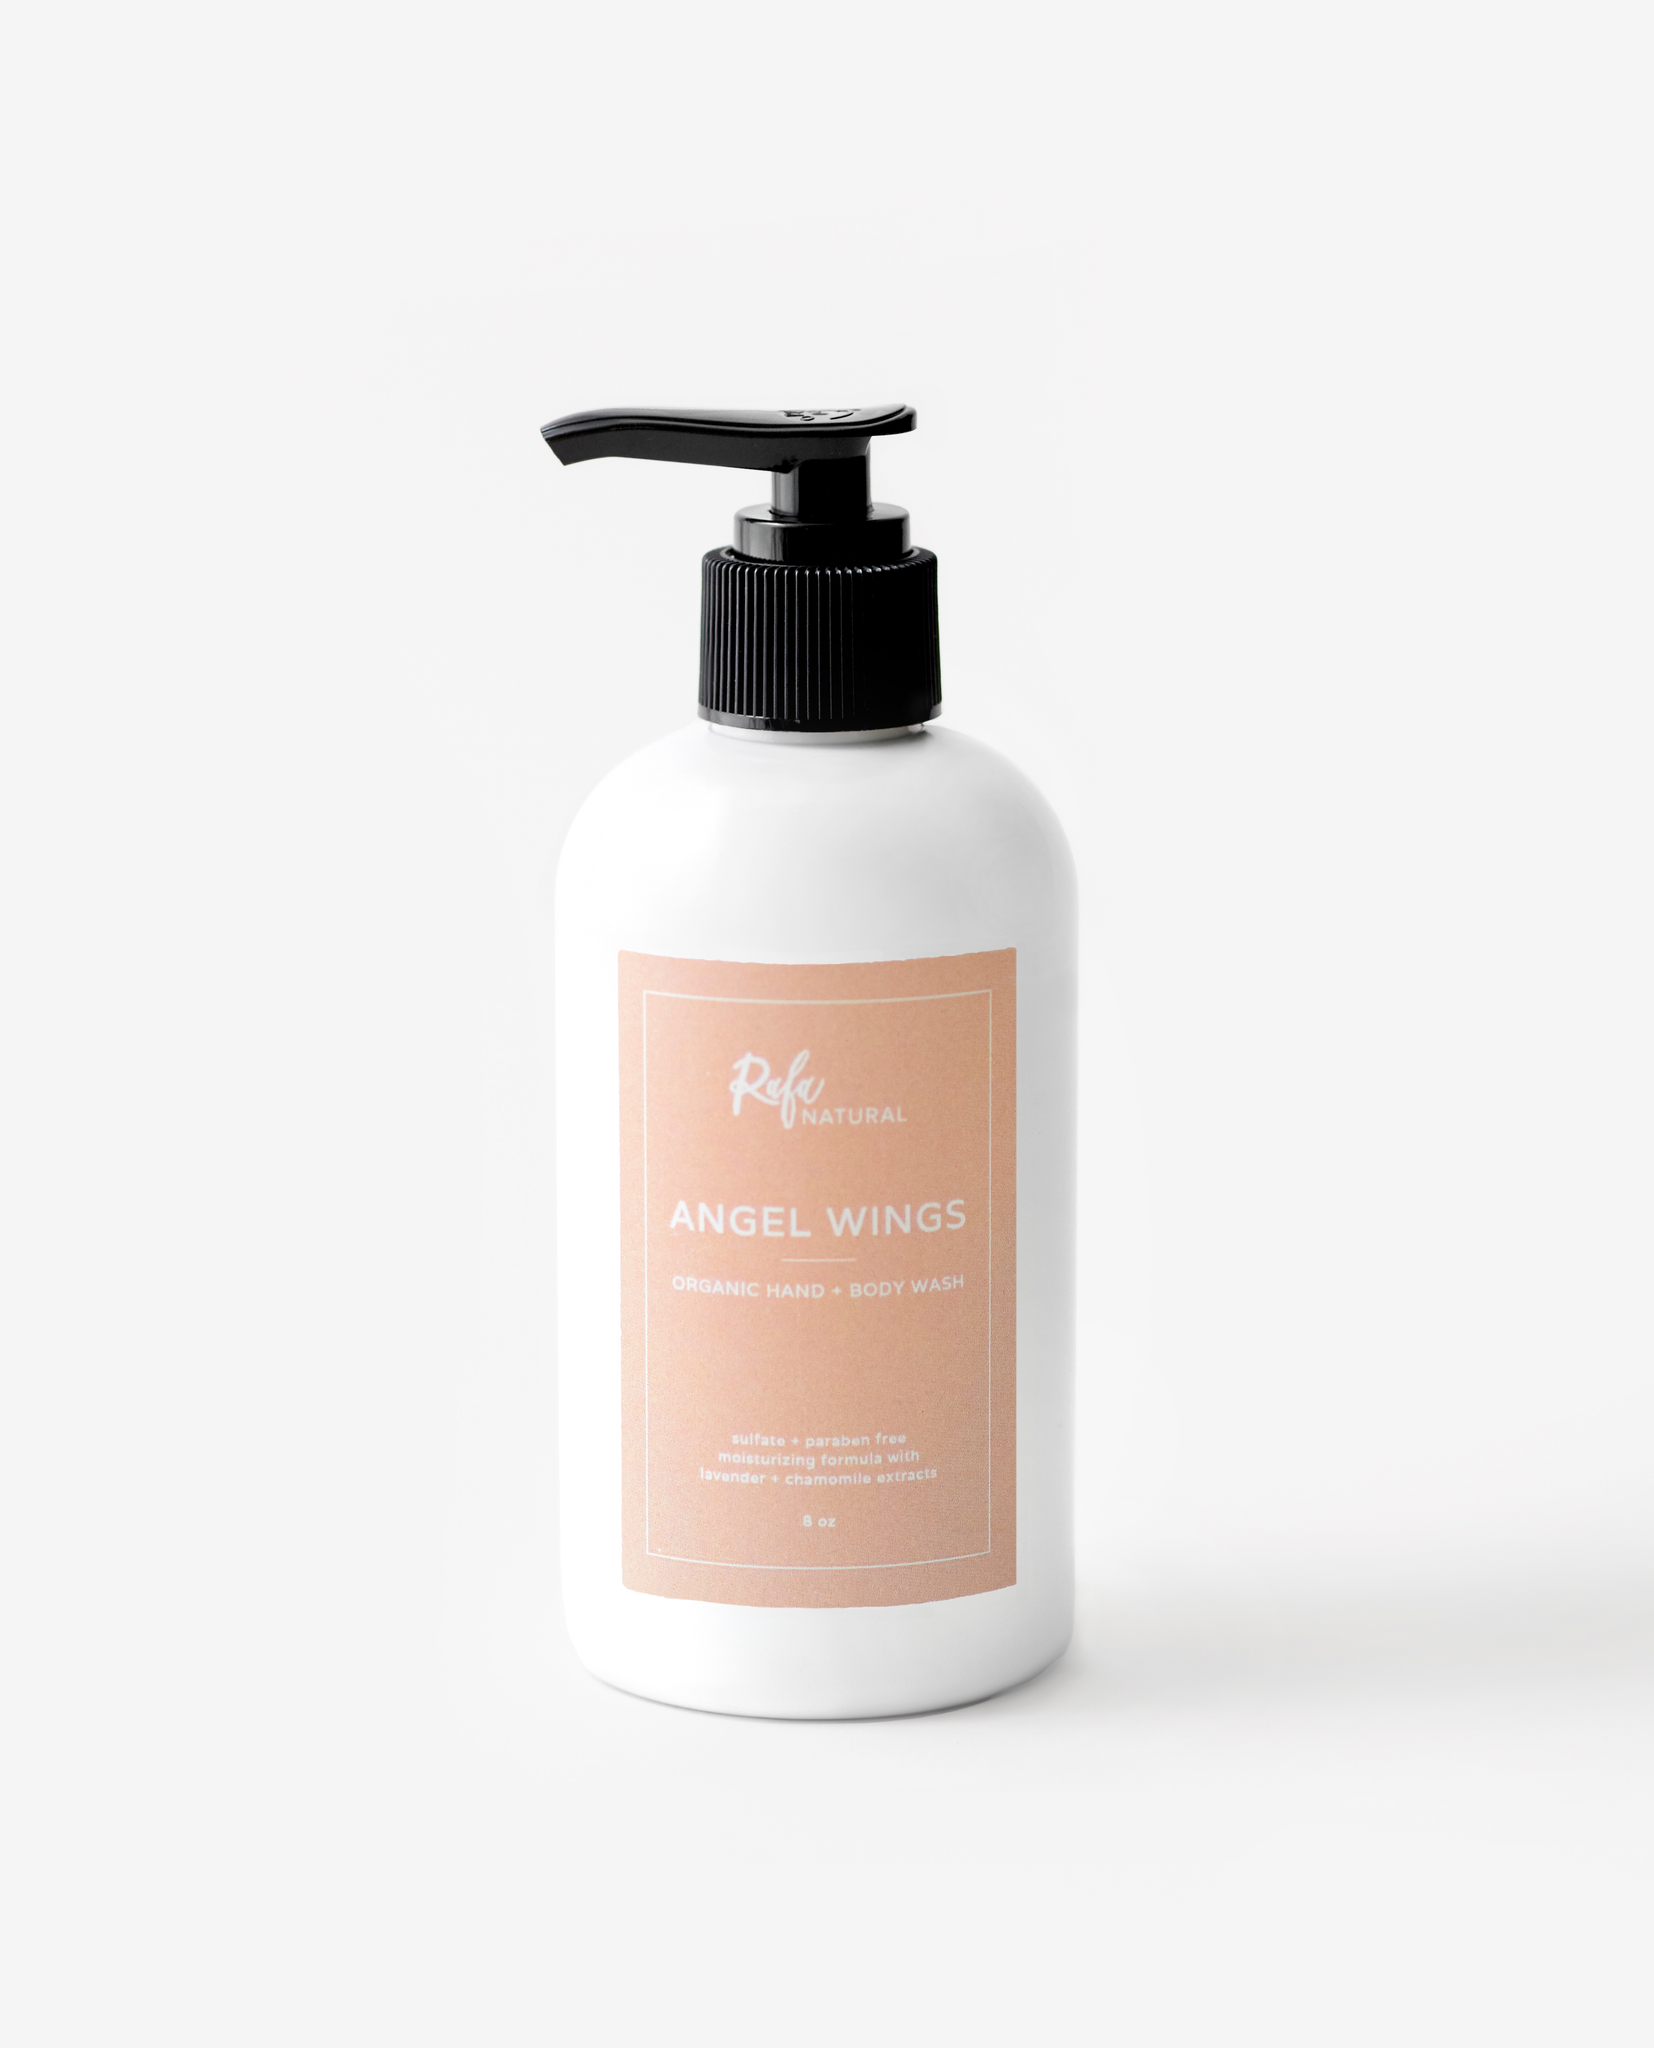 8oz. Bottle of Angel Wings Hand and Body Wash by Rafa Natural